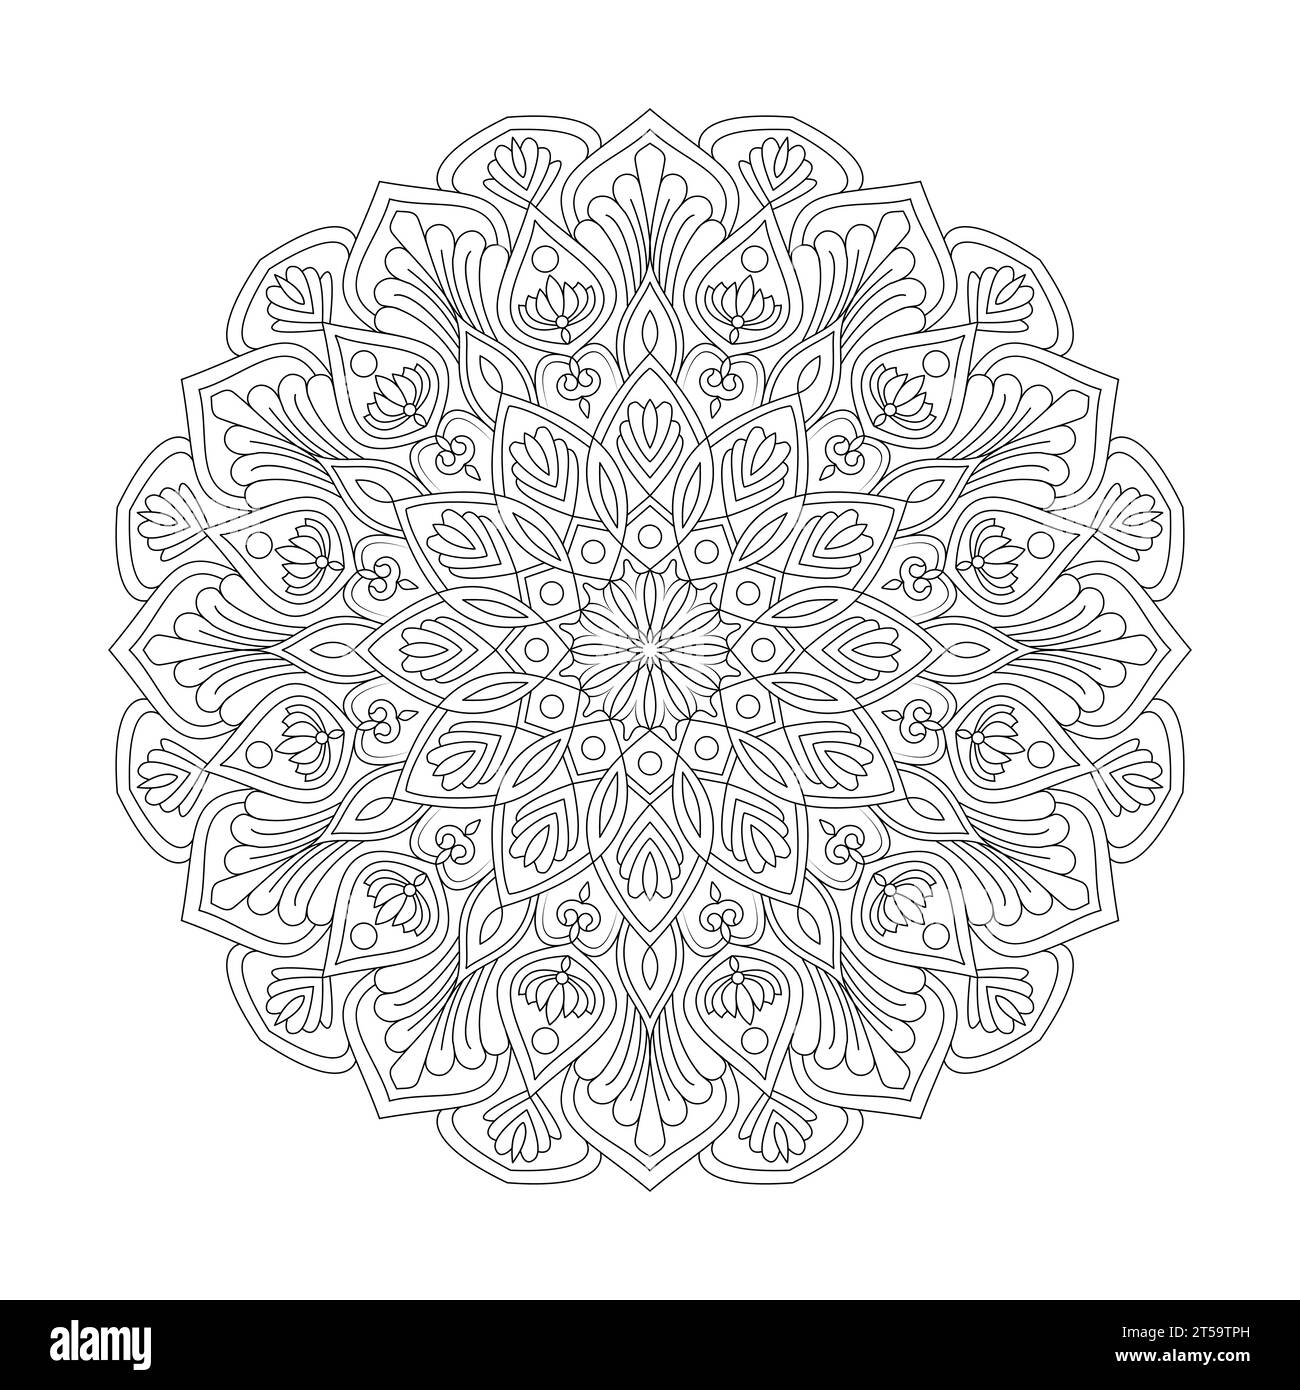 Adult Celestial Serenity mandala colouring book page for KDP book interior. Peaceful Petals, Ability to Relax, Brain Experiences, Harmonious Haven, Pea Stock Vector